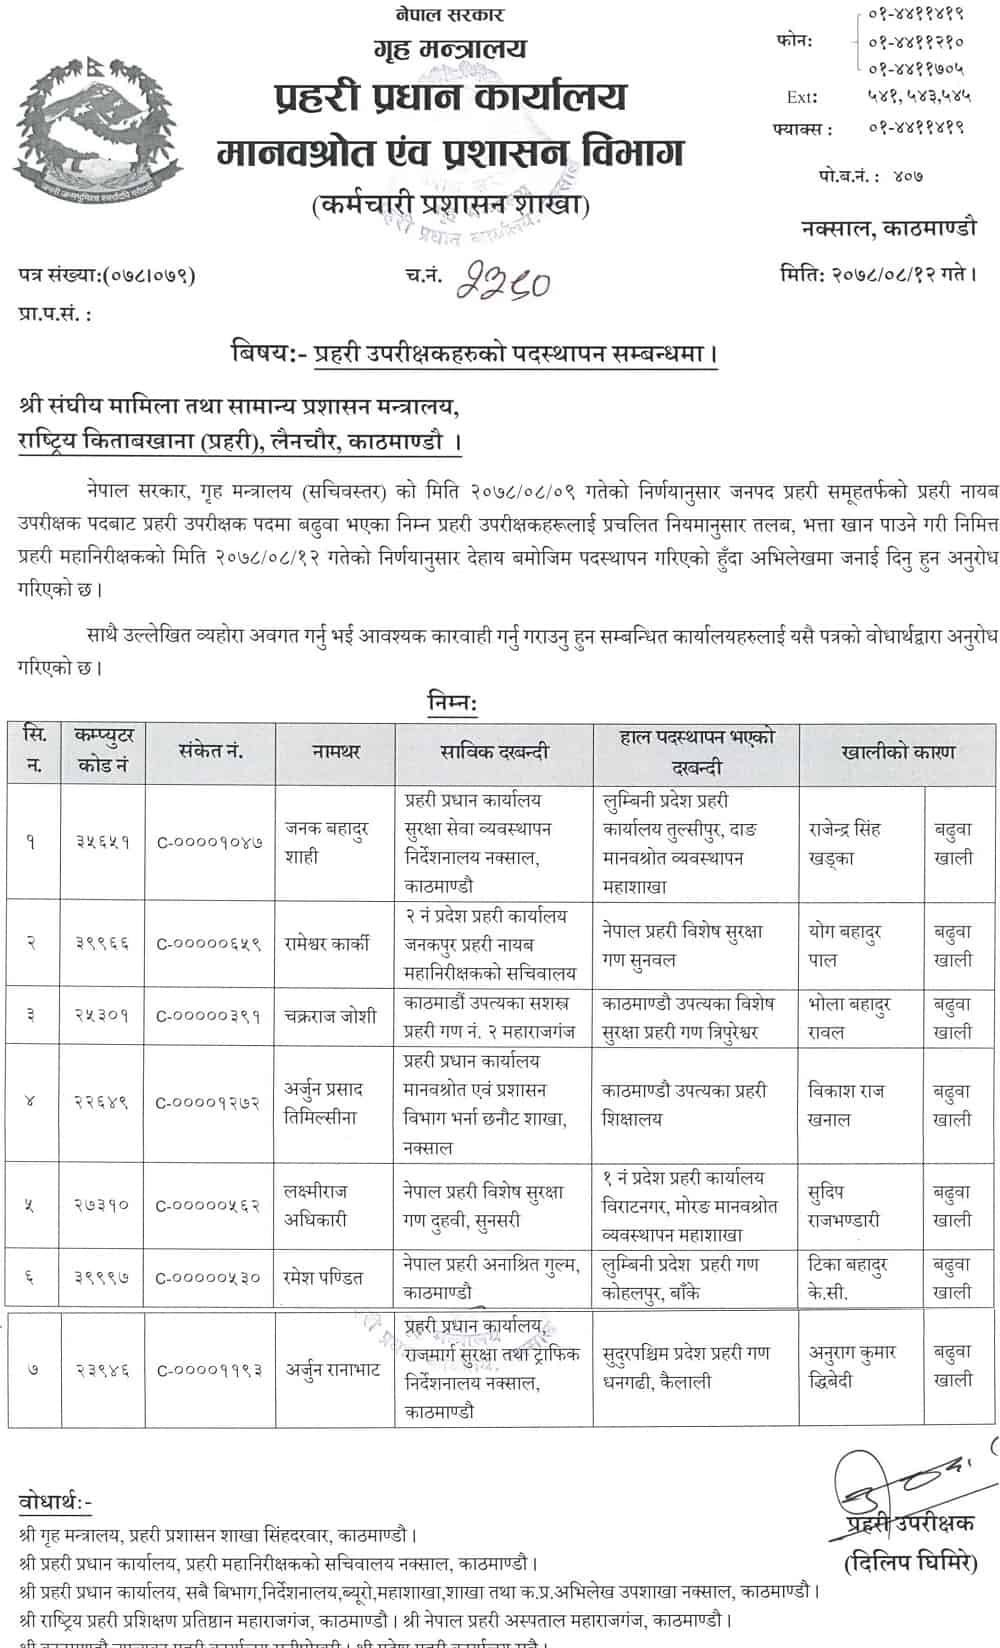 Nepal Police Placement for the Post of DSP, SP and SSP 1